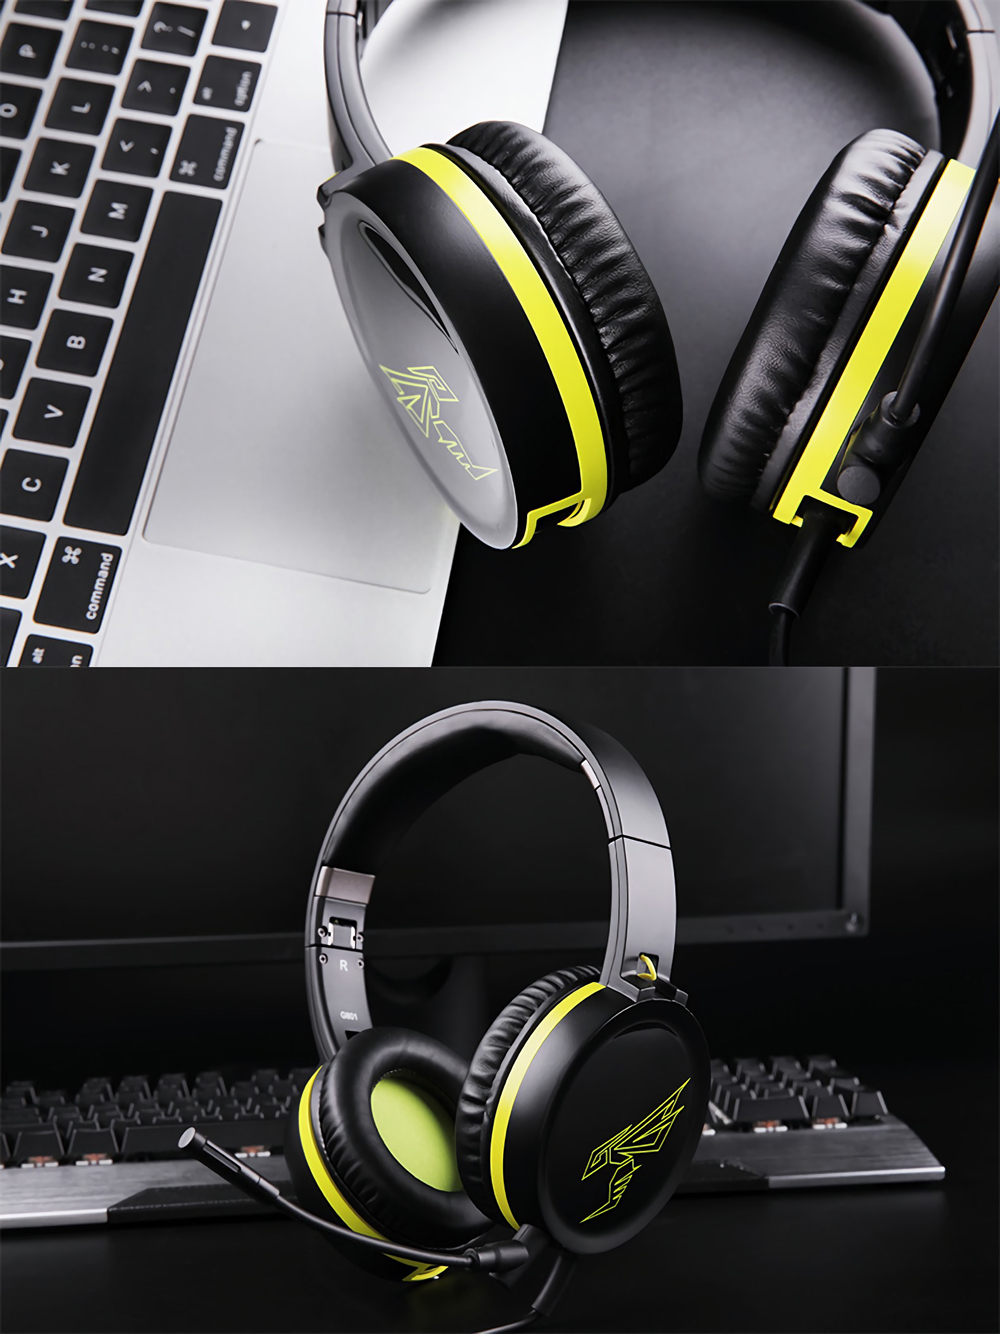 SOMiC G801 Portable Foldable 3.5mm Auido Gaming Headset Headphone with Removable Microphone 67